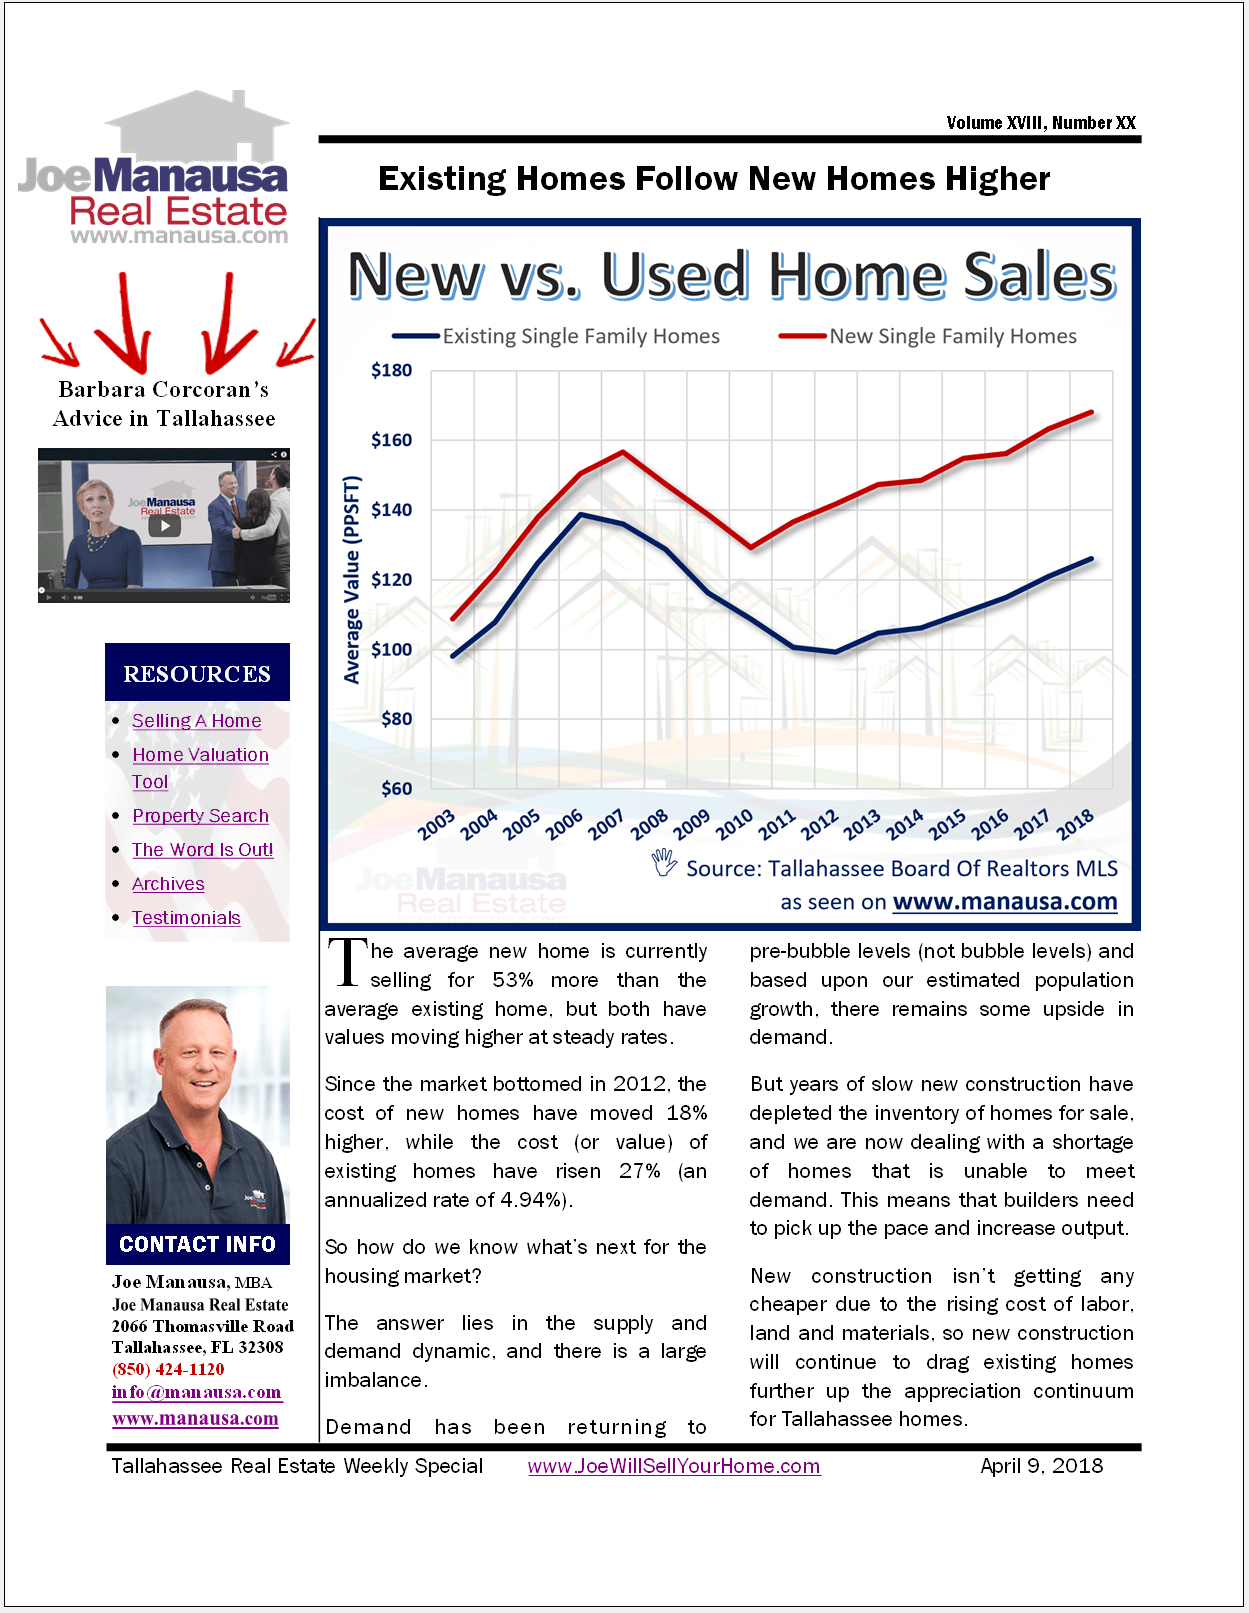 Existing Homes Follow New Homes Higher